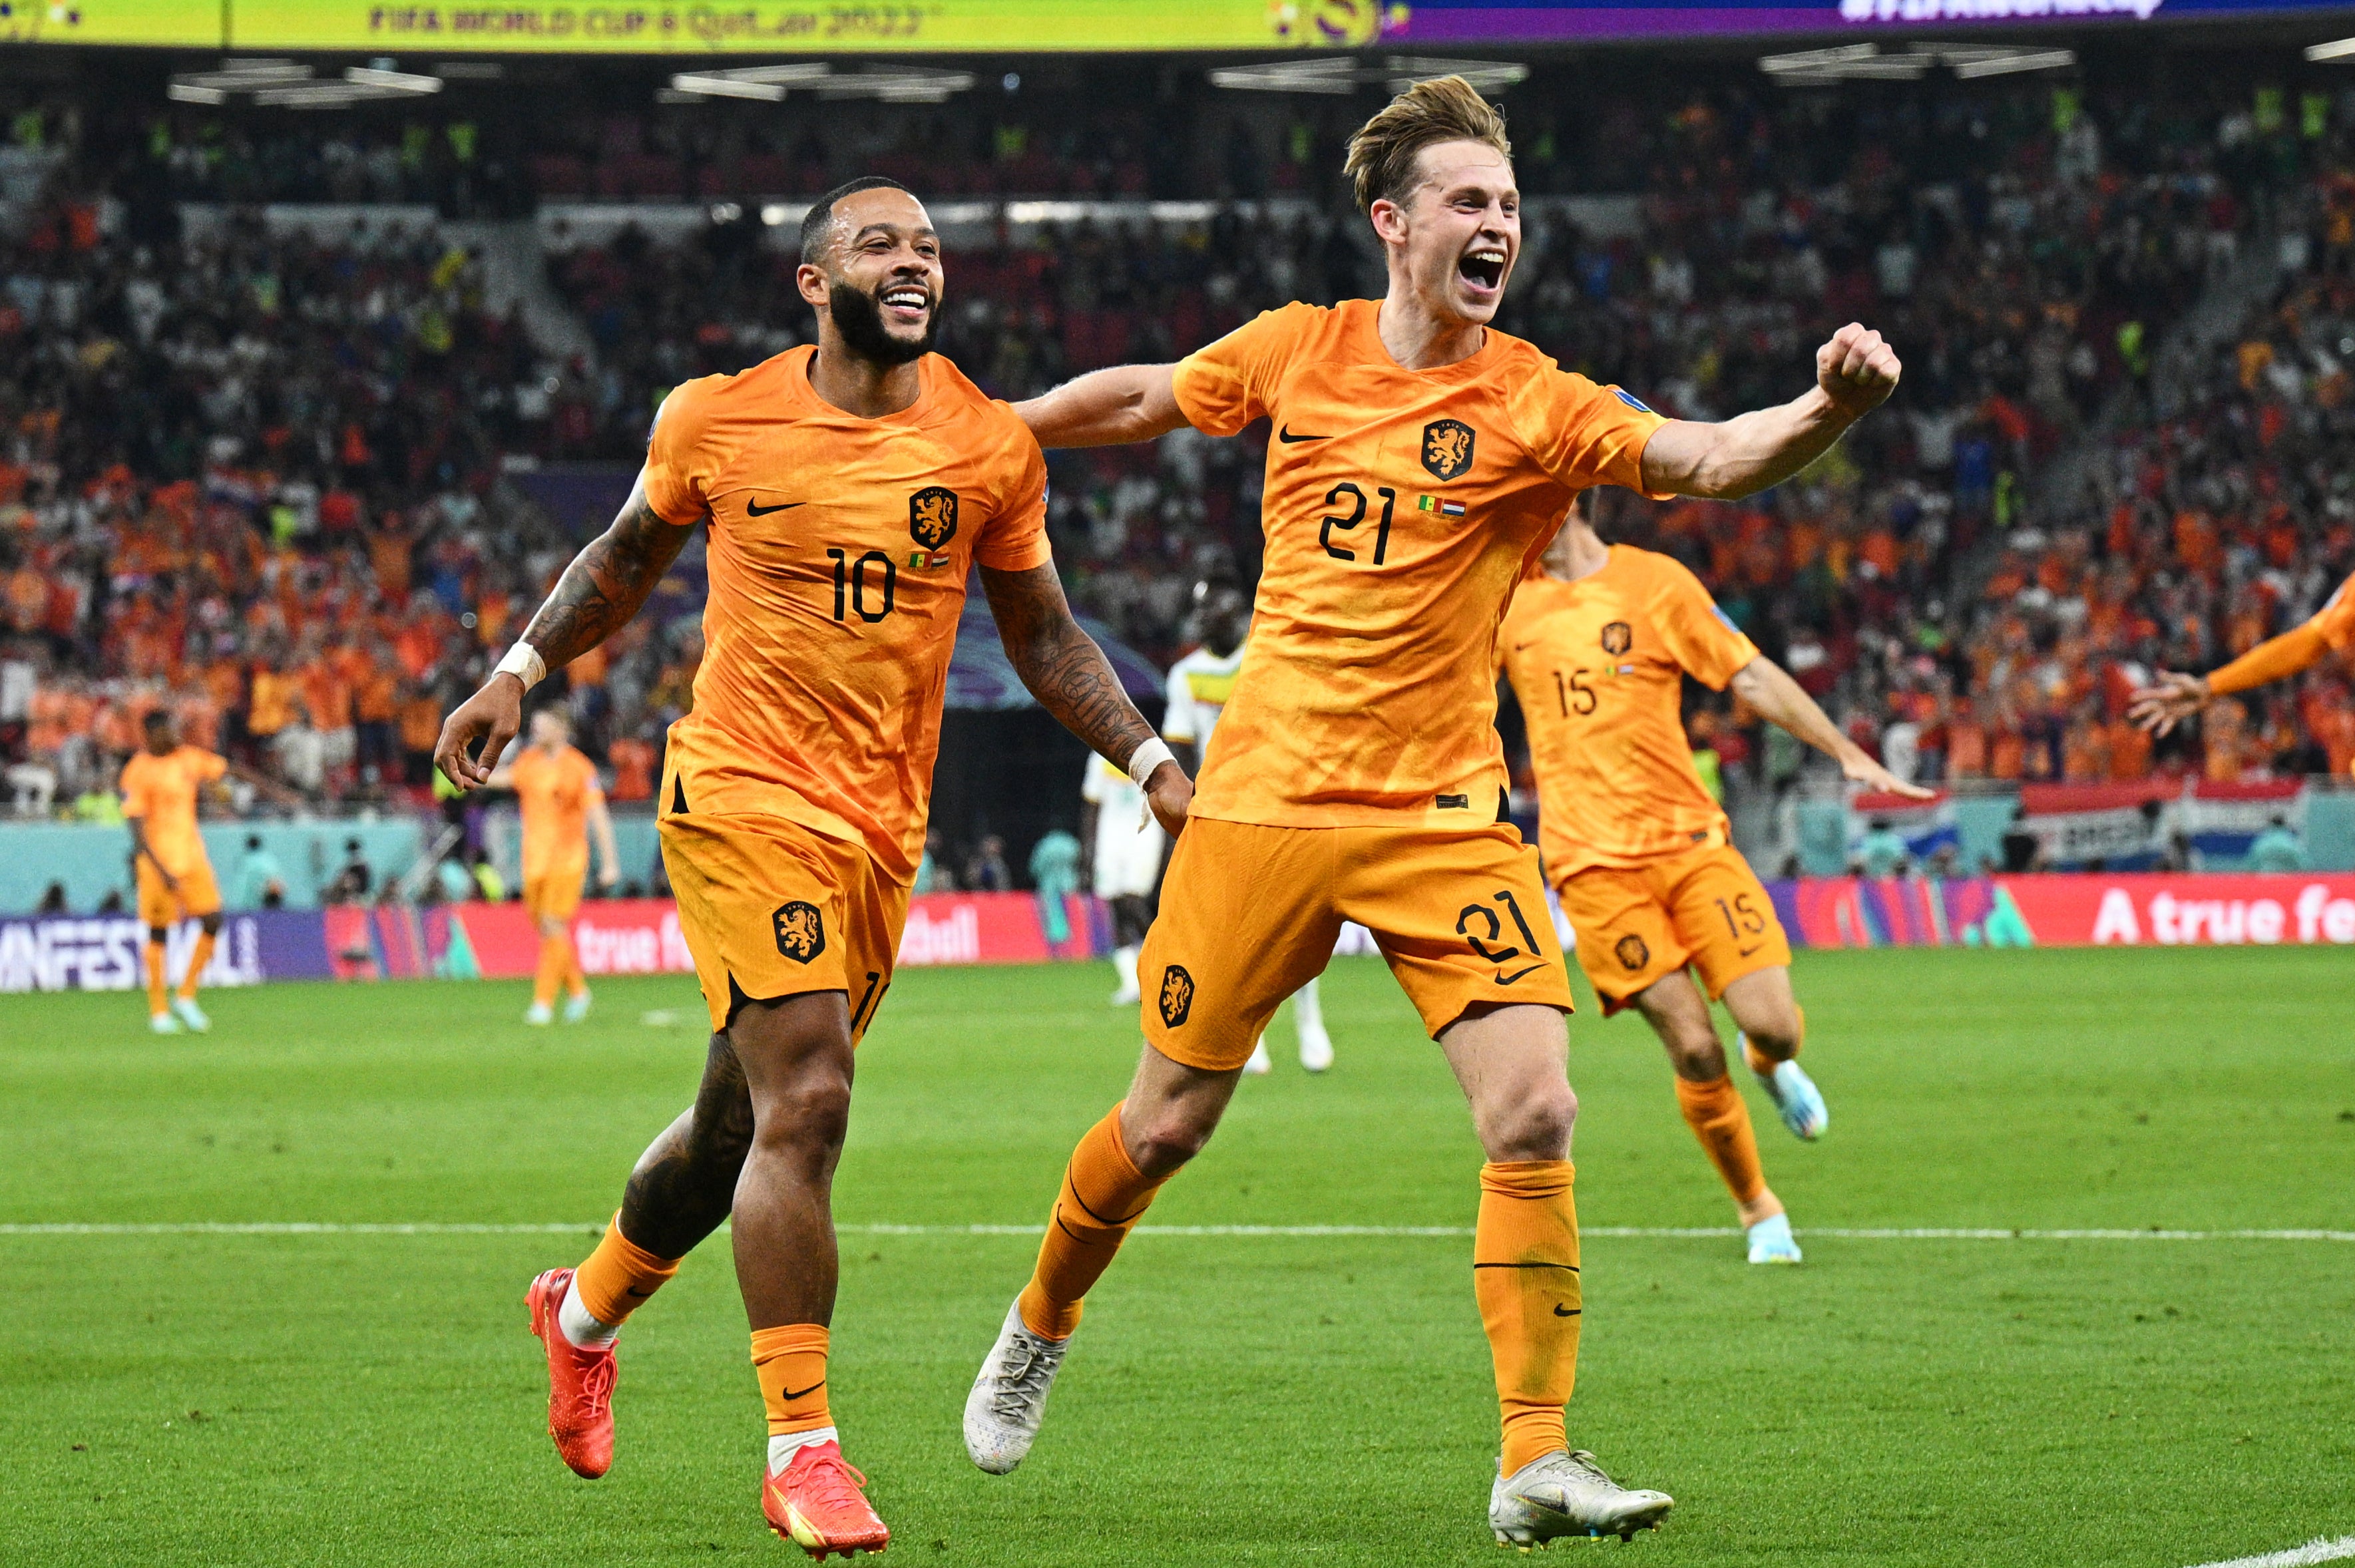 Memphis Depay (L) and Frenkie de Jong (R) are both in the Netherlands squad despite injury concerns